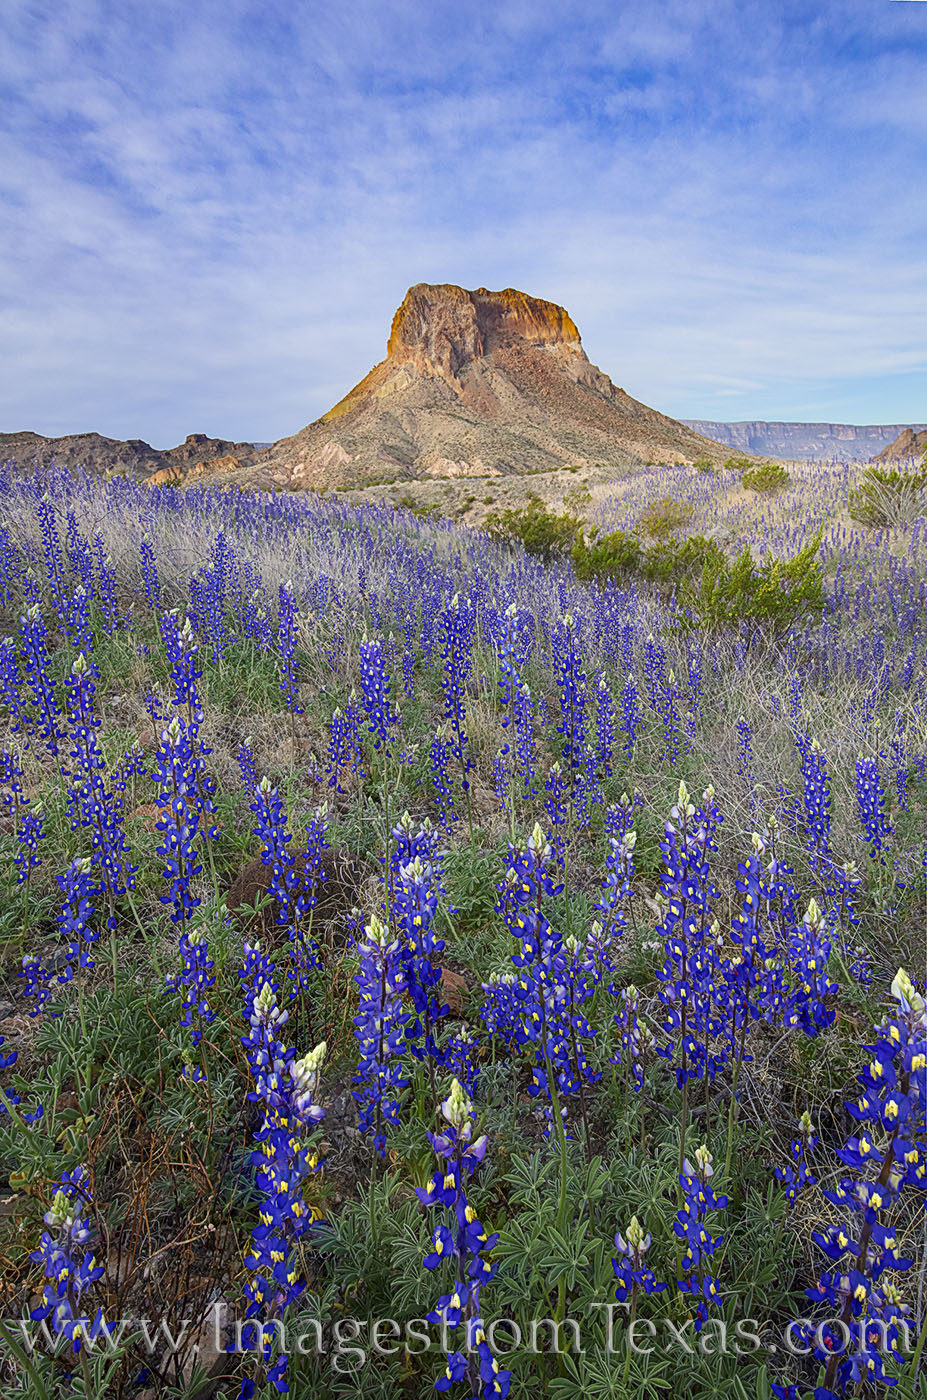 Bluebonnets fill the slopes just east of Cerro Castellan in Big Bend National Park. Spring of 2019 was an amazing year for bluebonnets...